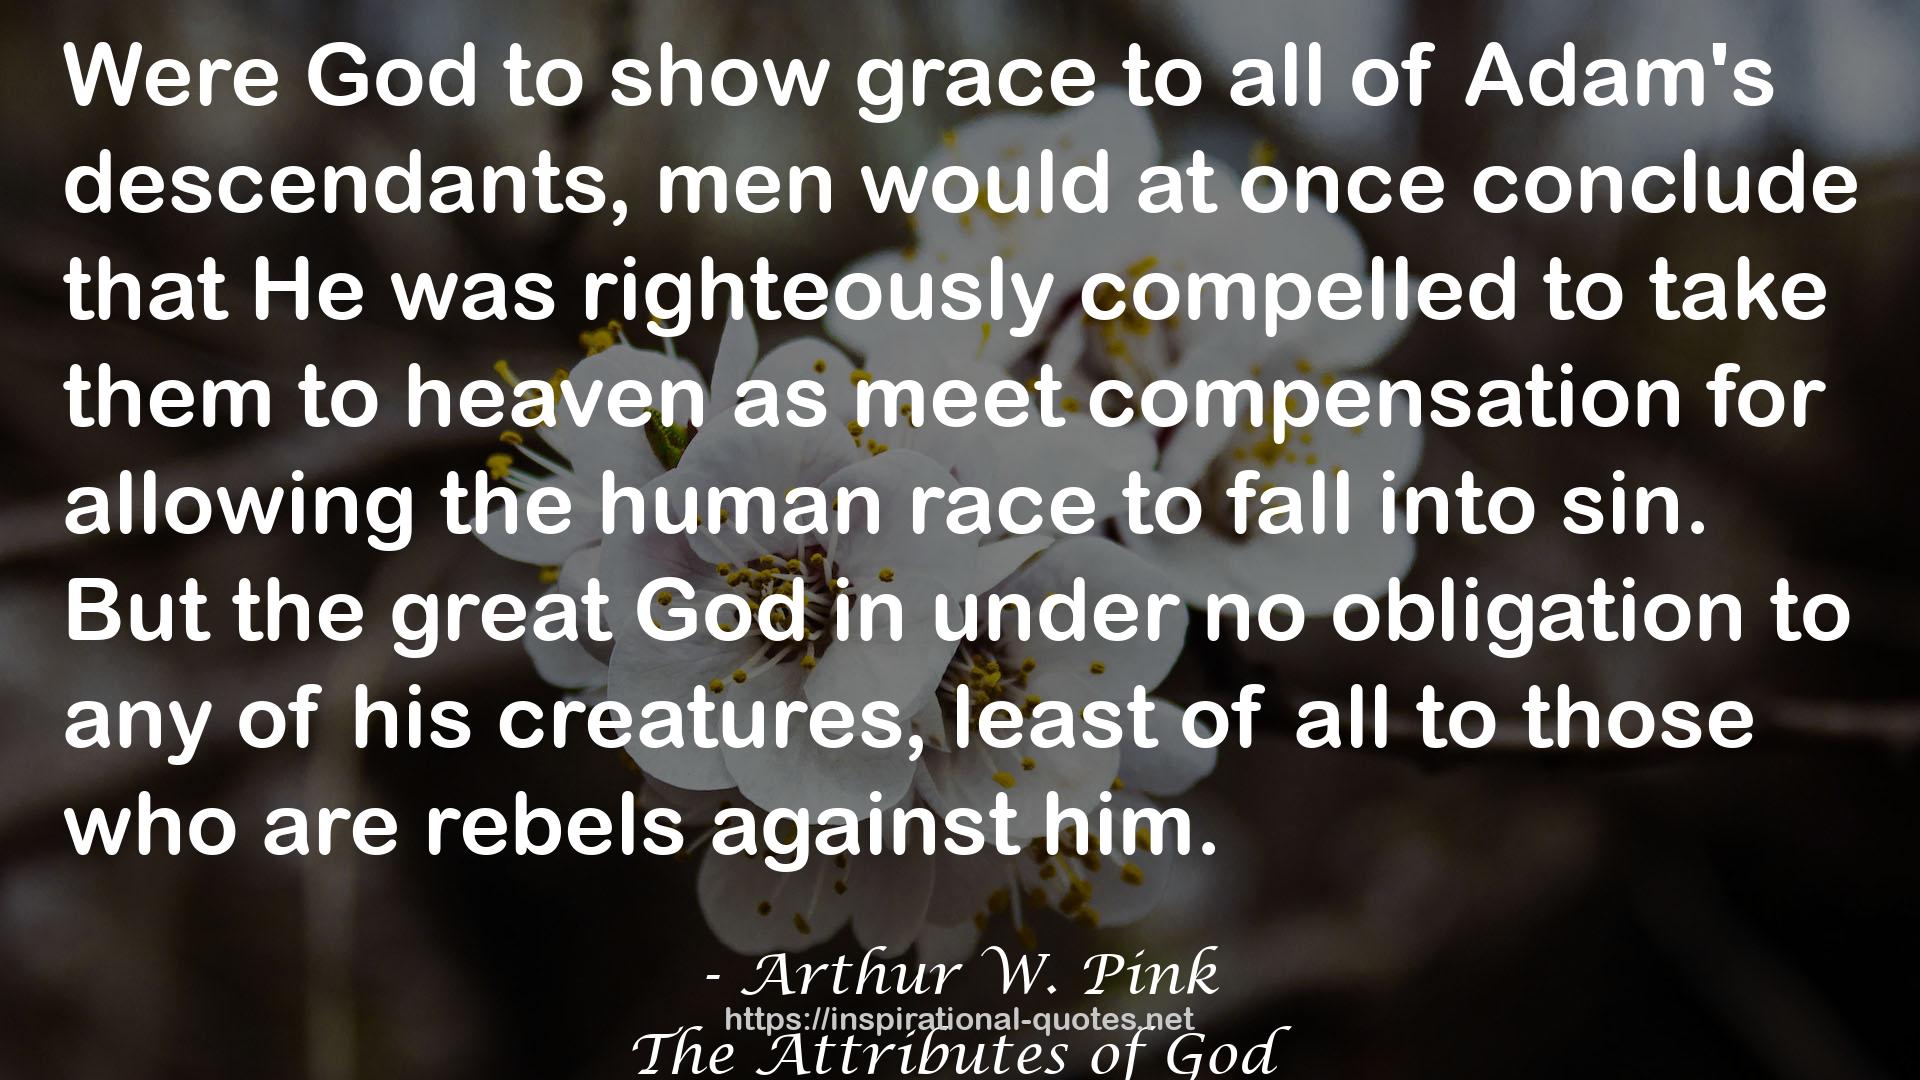 Arthur W. Pink QUOTES